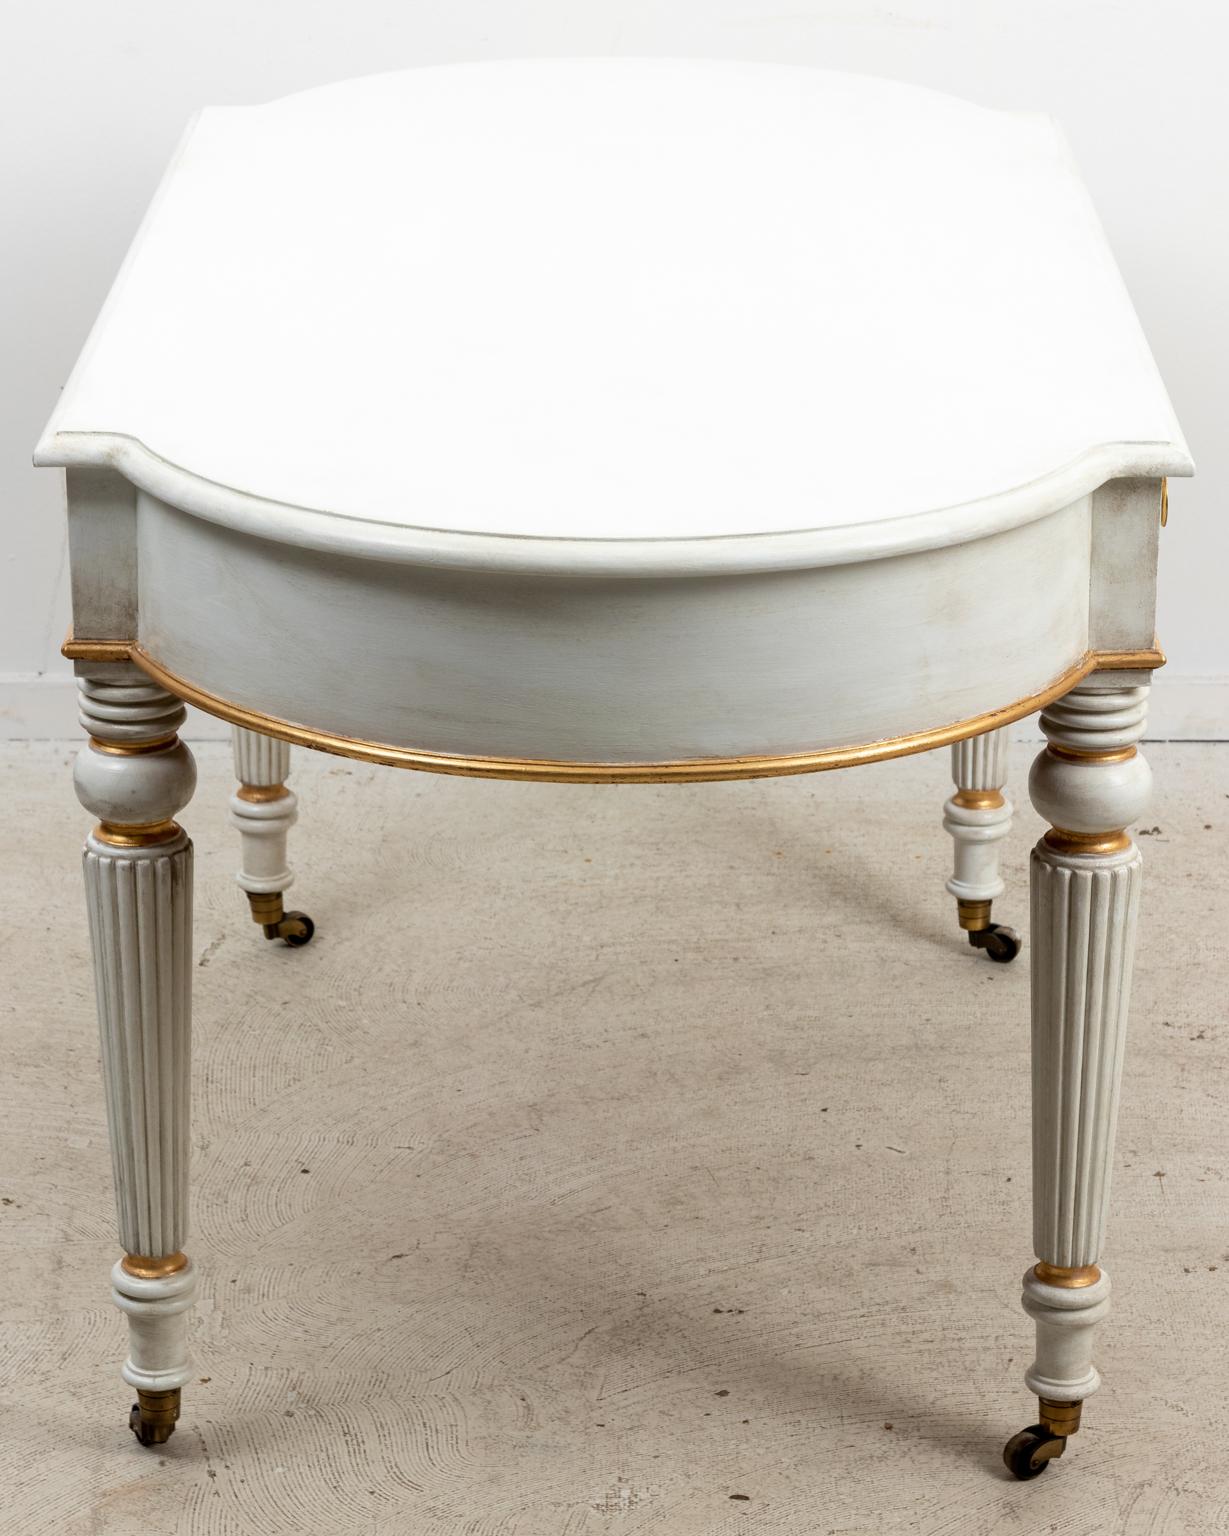 Circa 1980s Regency style white and gold writing table or robust desk with two drawers and working key. The piece also features curved ends with turned and reeded tapered legs ending on brass cup casters. Made in the United States. Please note of